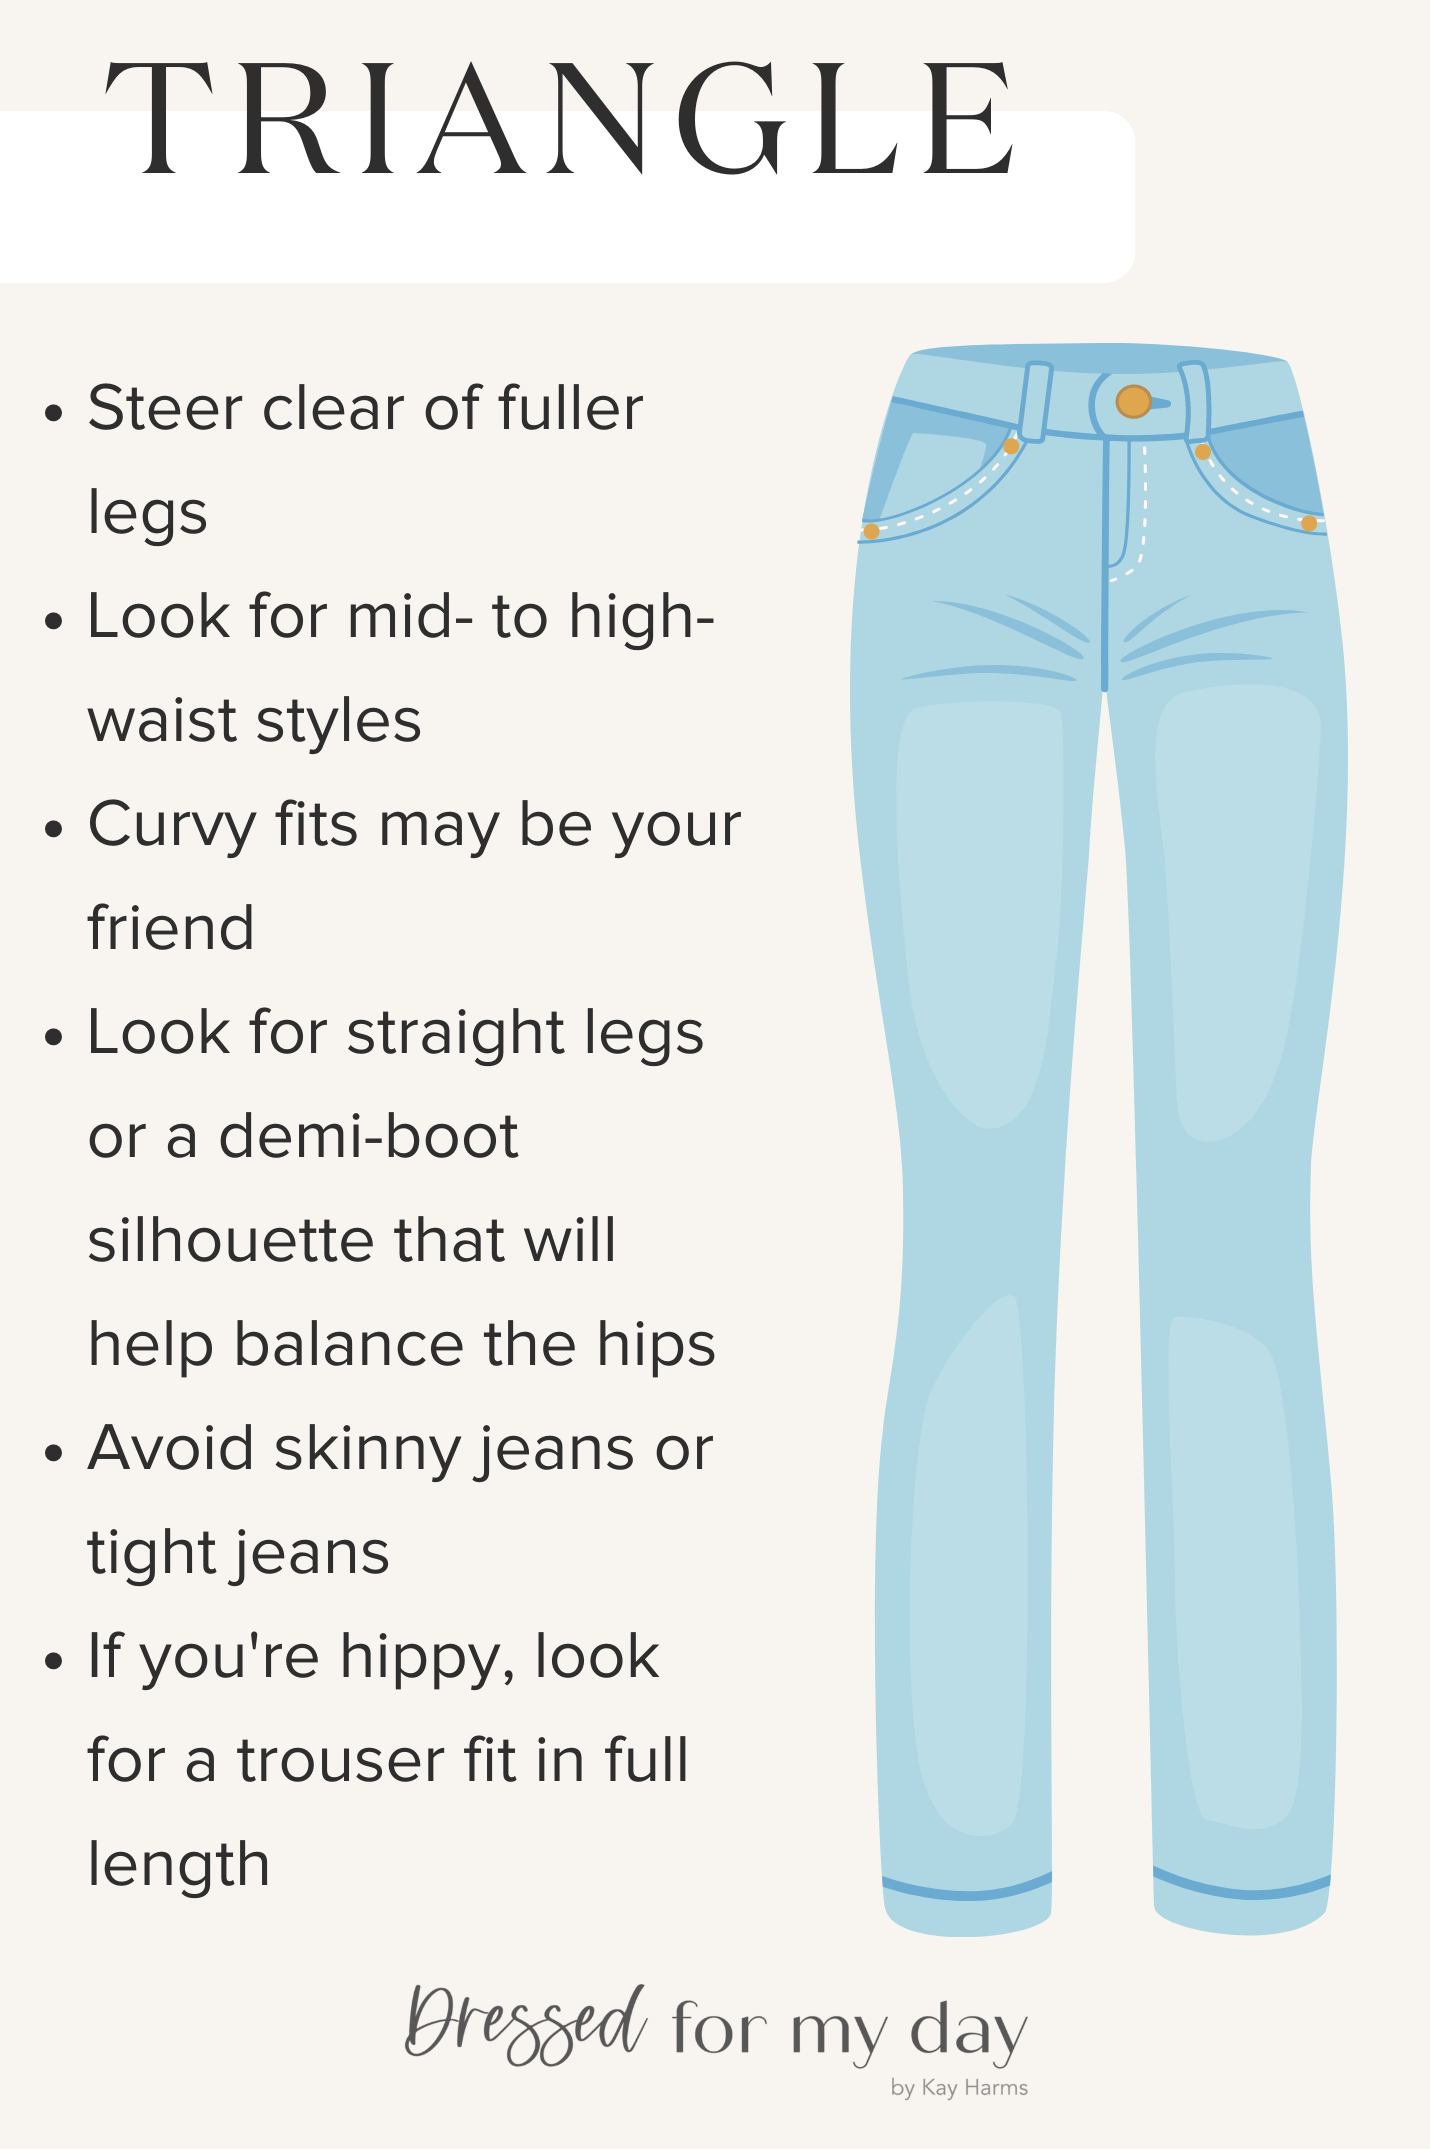 Denim Fit Tips for Triangles